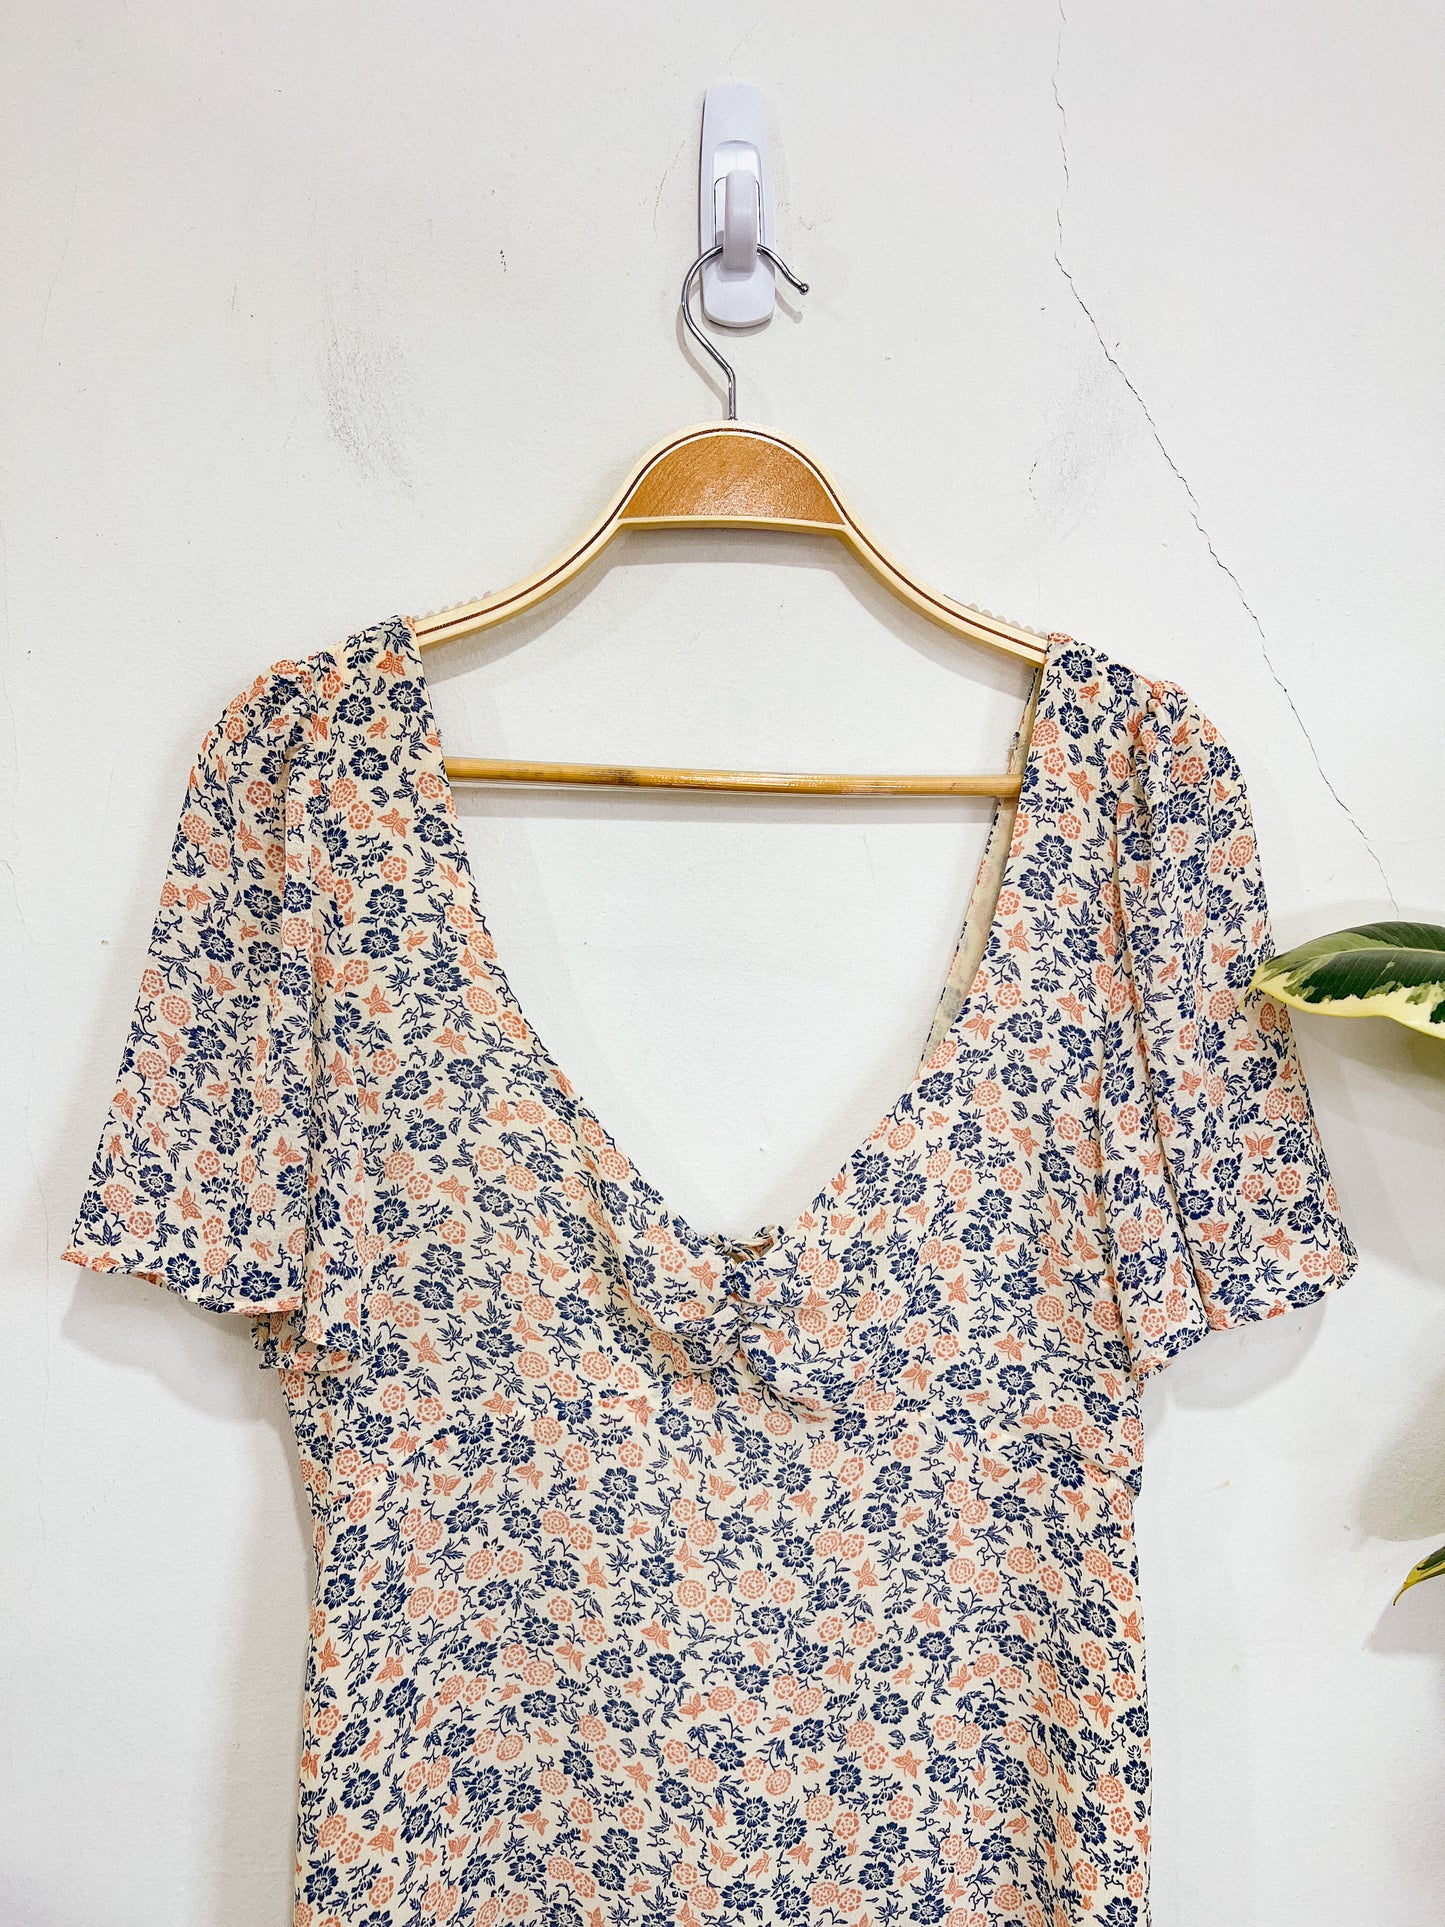 Urban Outfitters Floral Summer Dress (Size L)